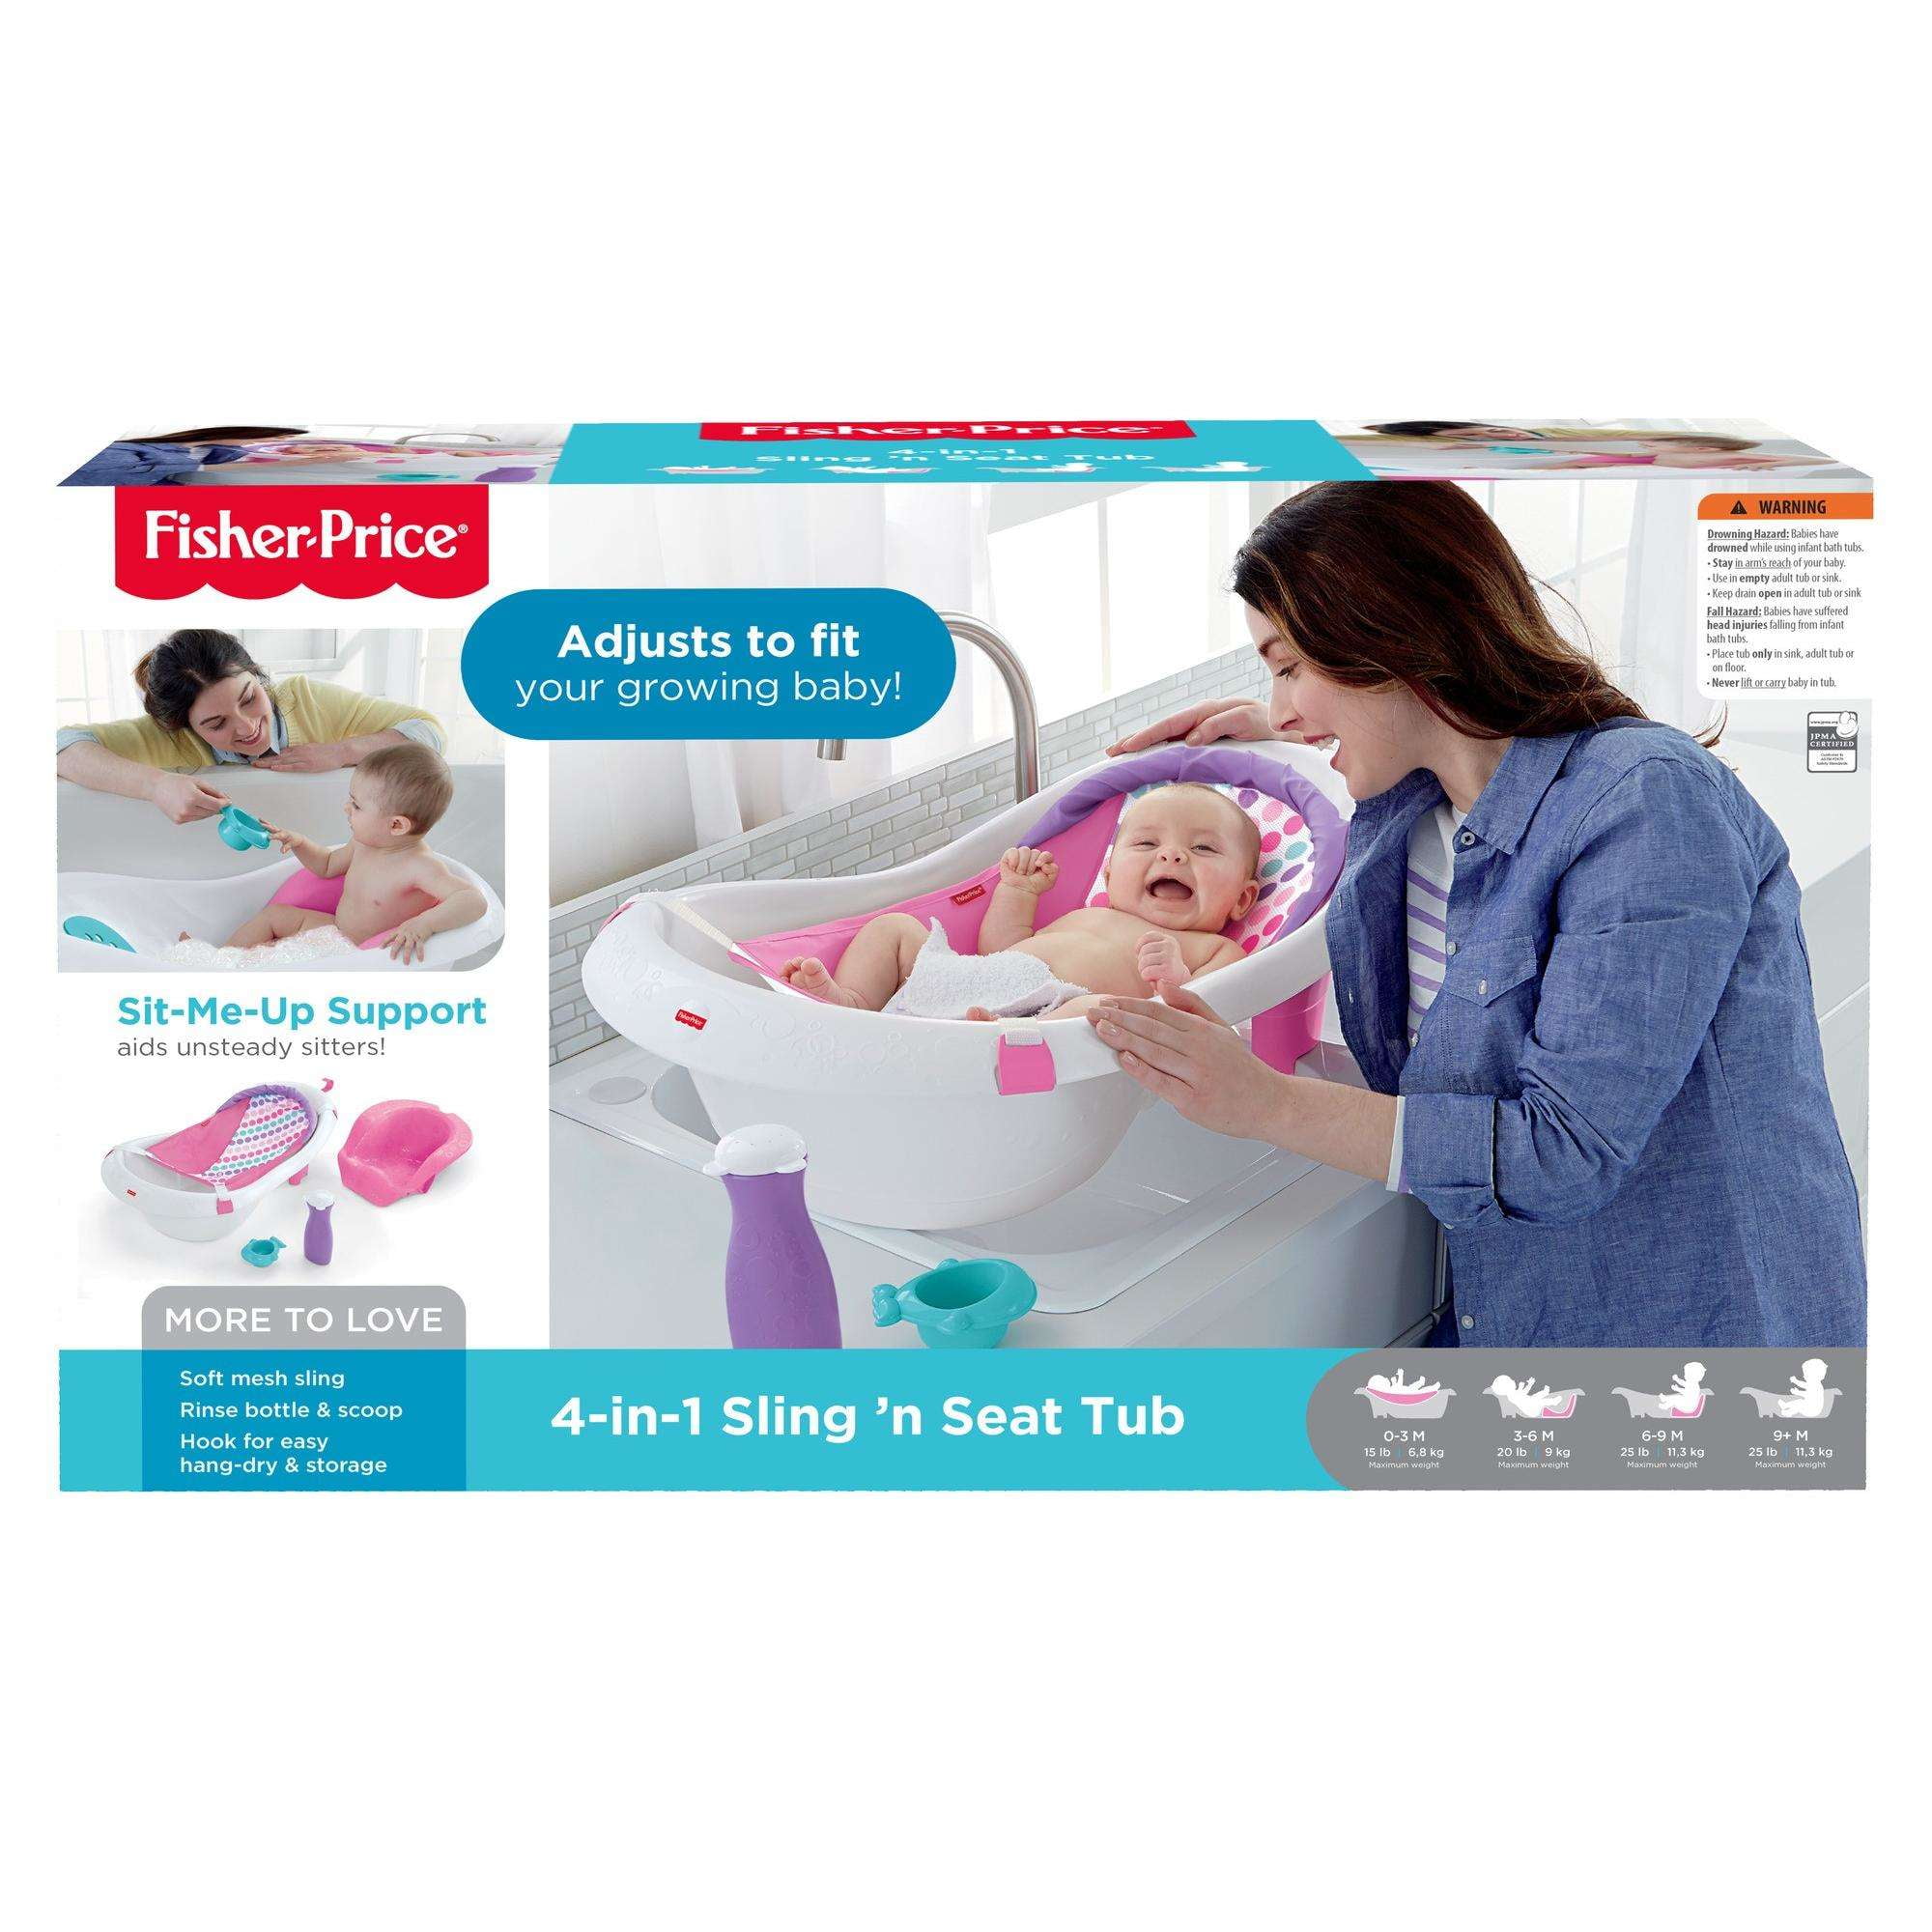 sling and seat tub